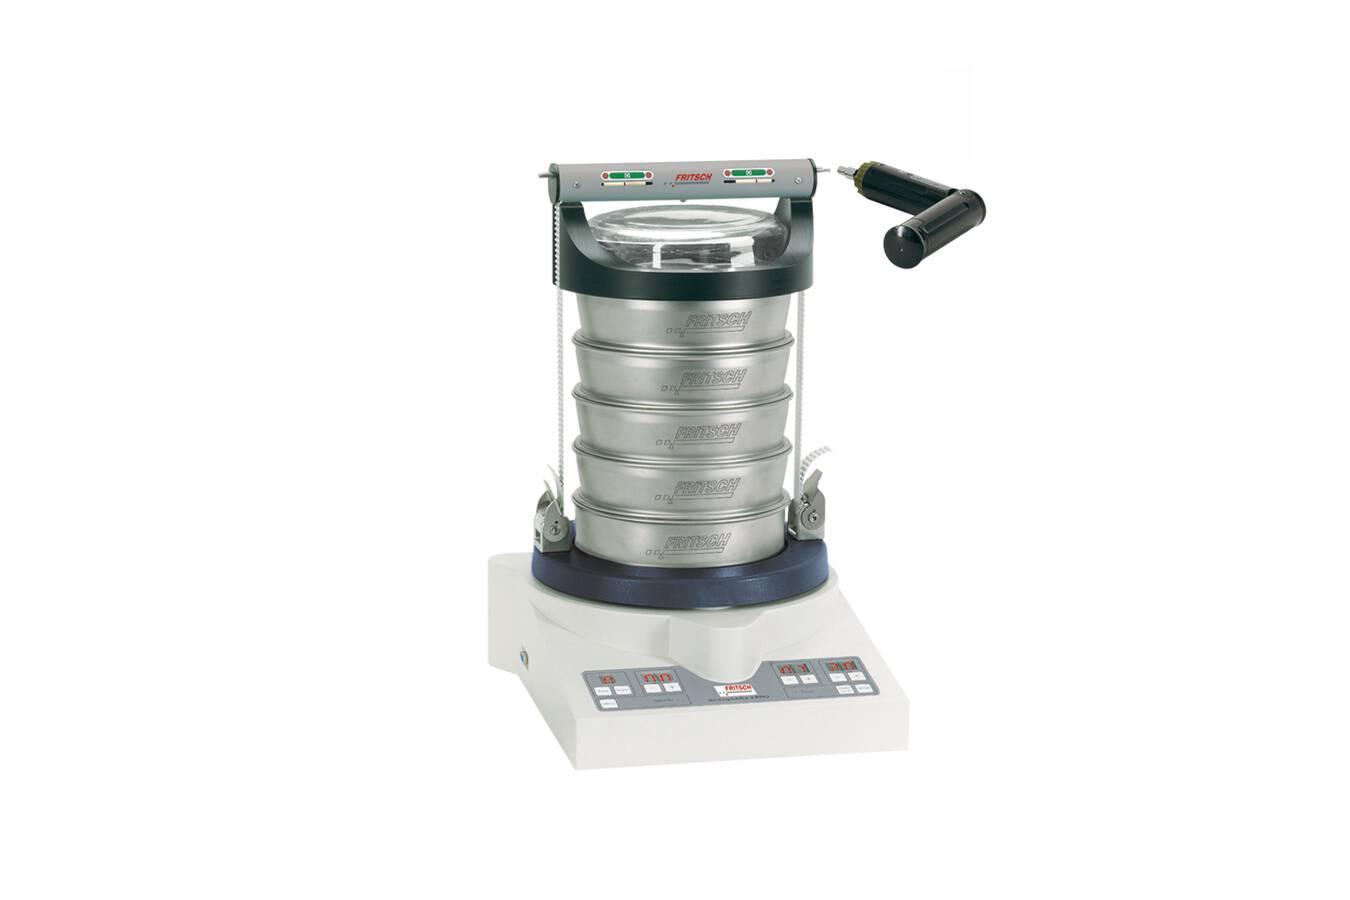 Sieve Shaker ANALYSETTE 3 PRO with reproducible sieve stack tensioning system TorqueMaster